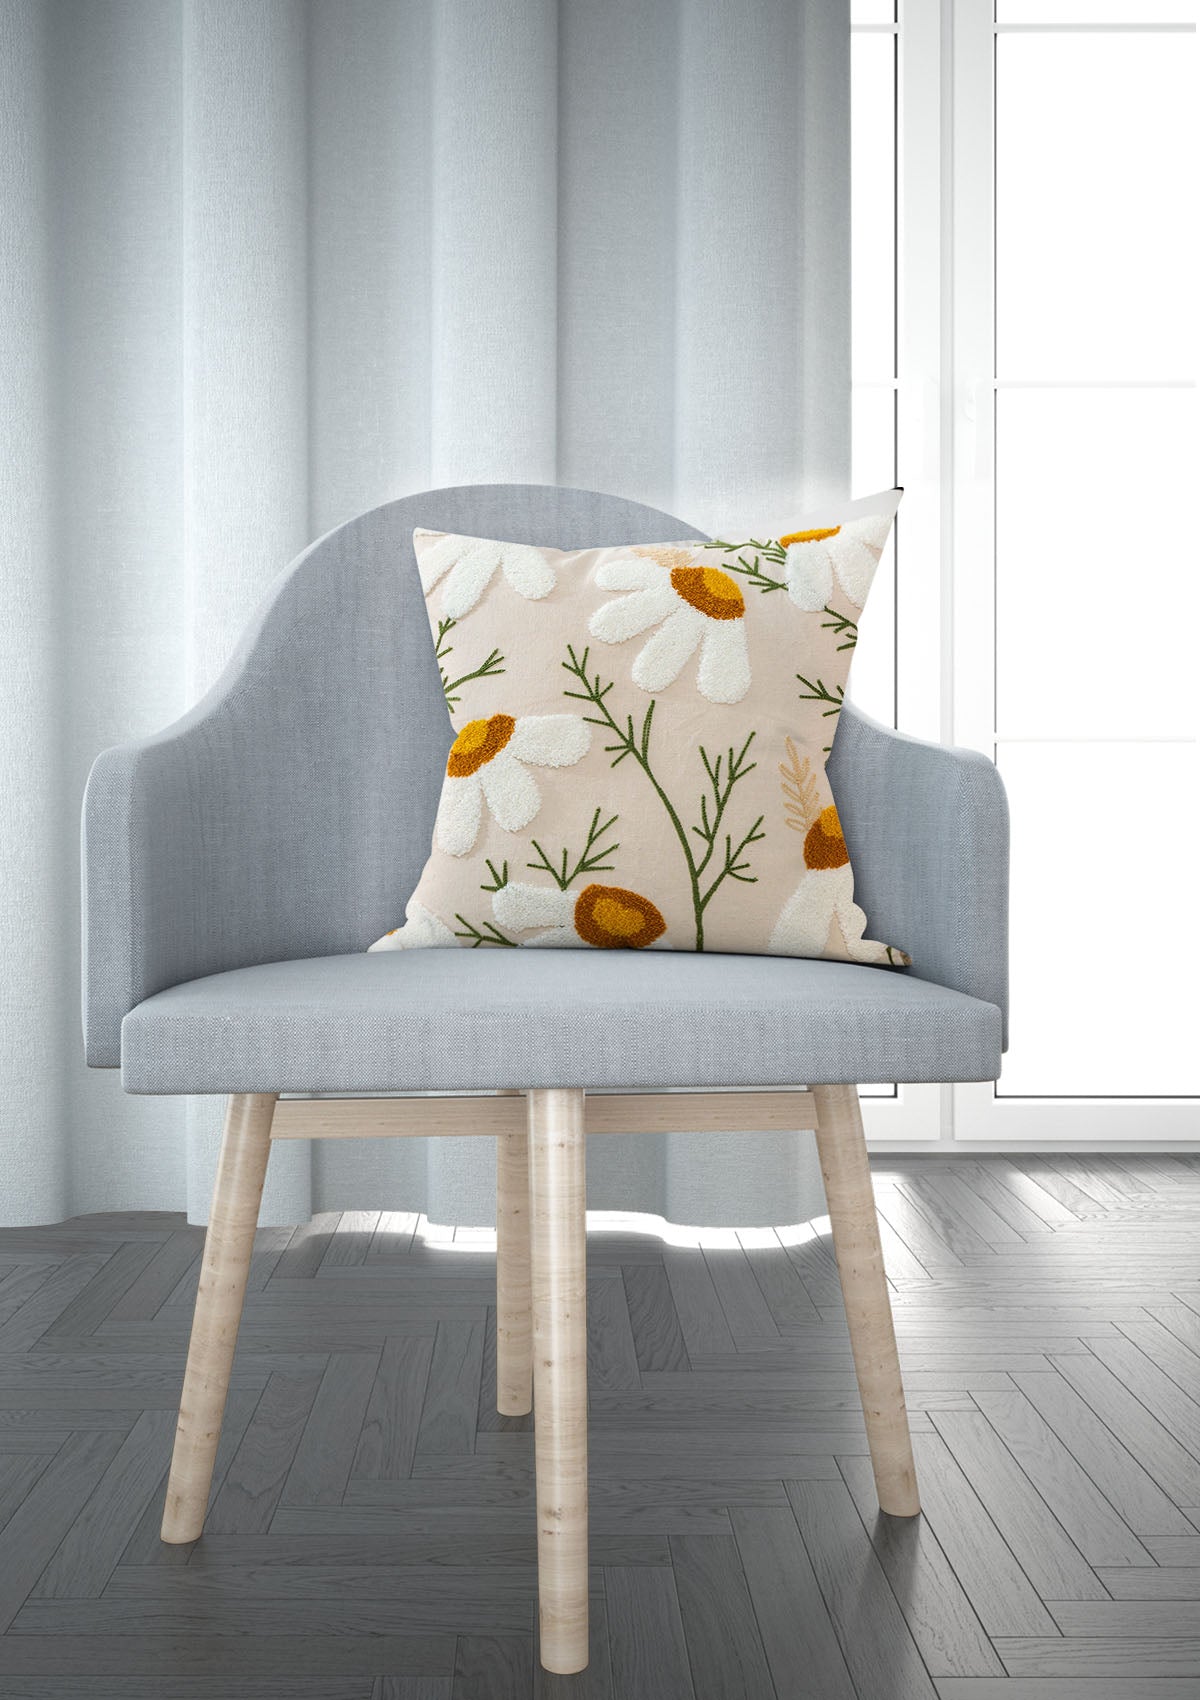 Cream cushion cover with delicate floral pattern, adding elegance to your home decor